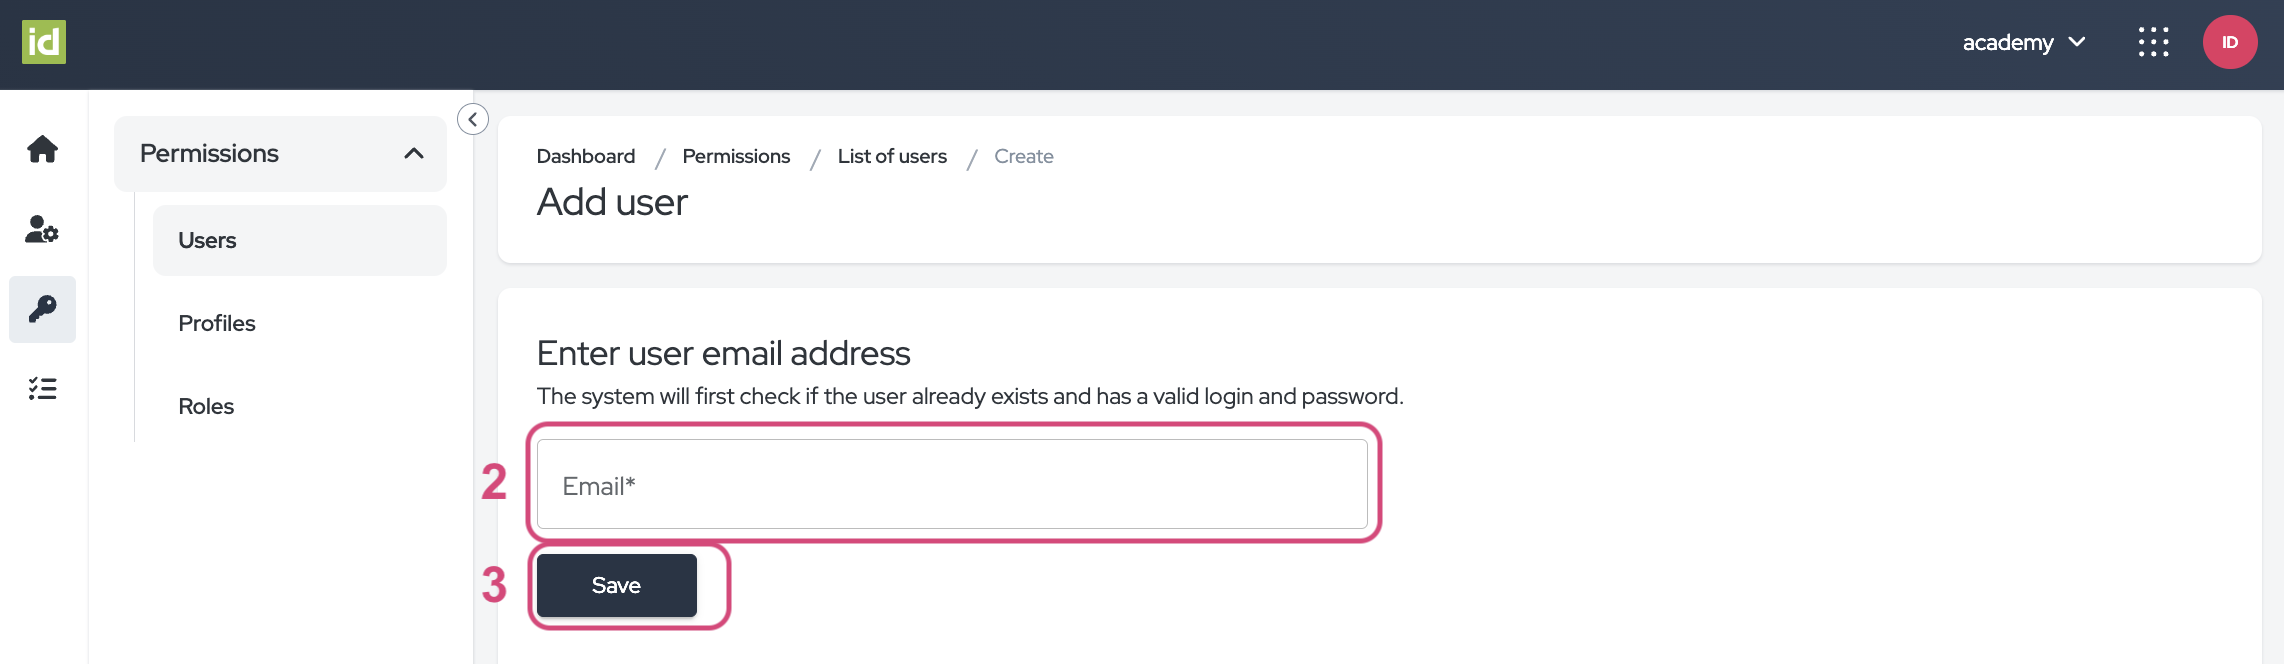 Enter an email address for your user.